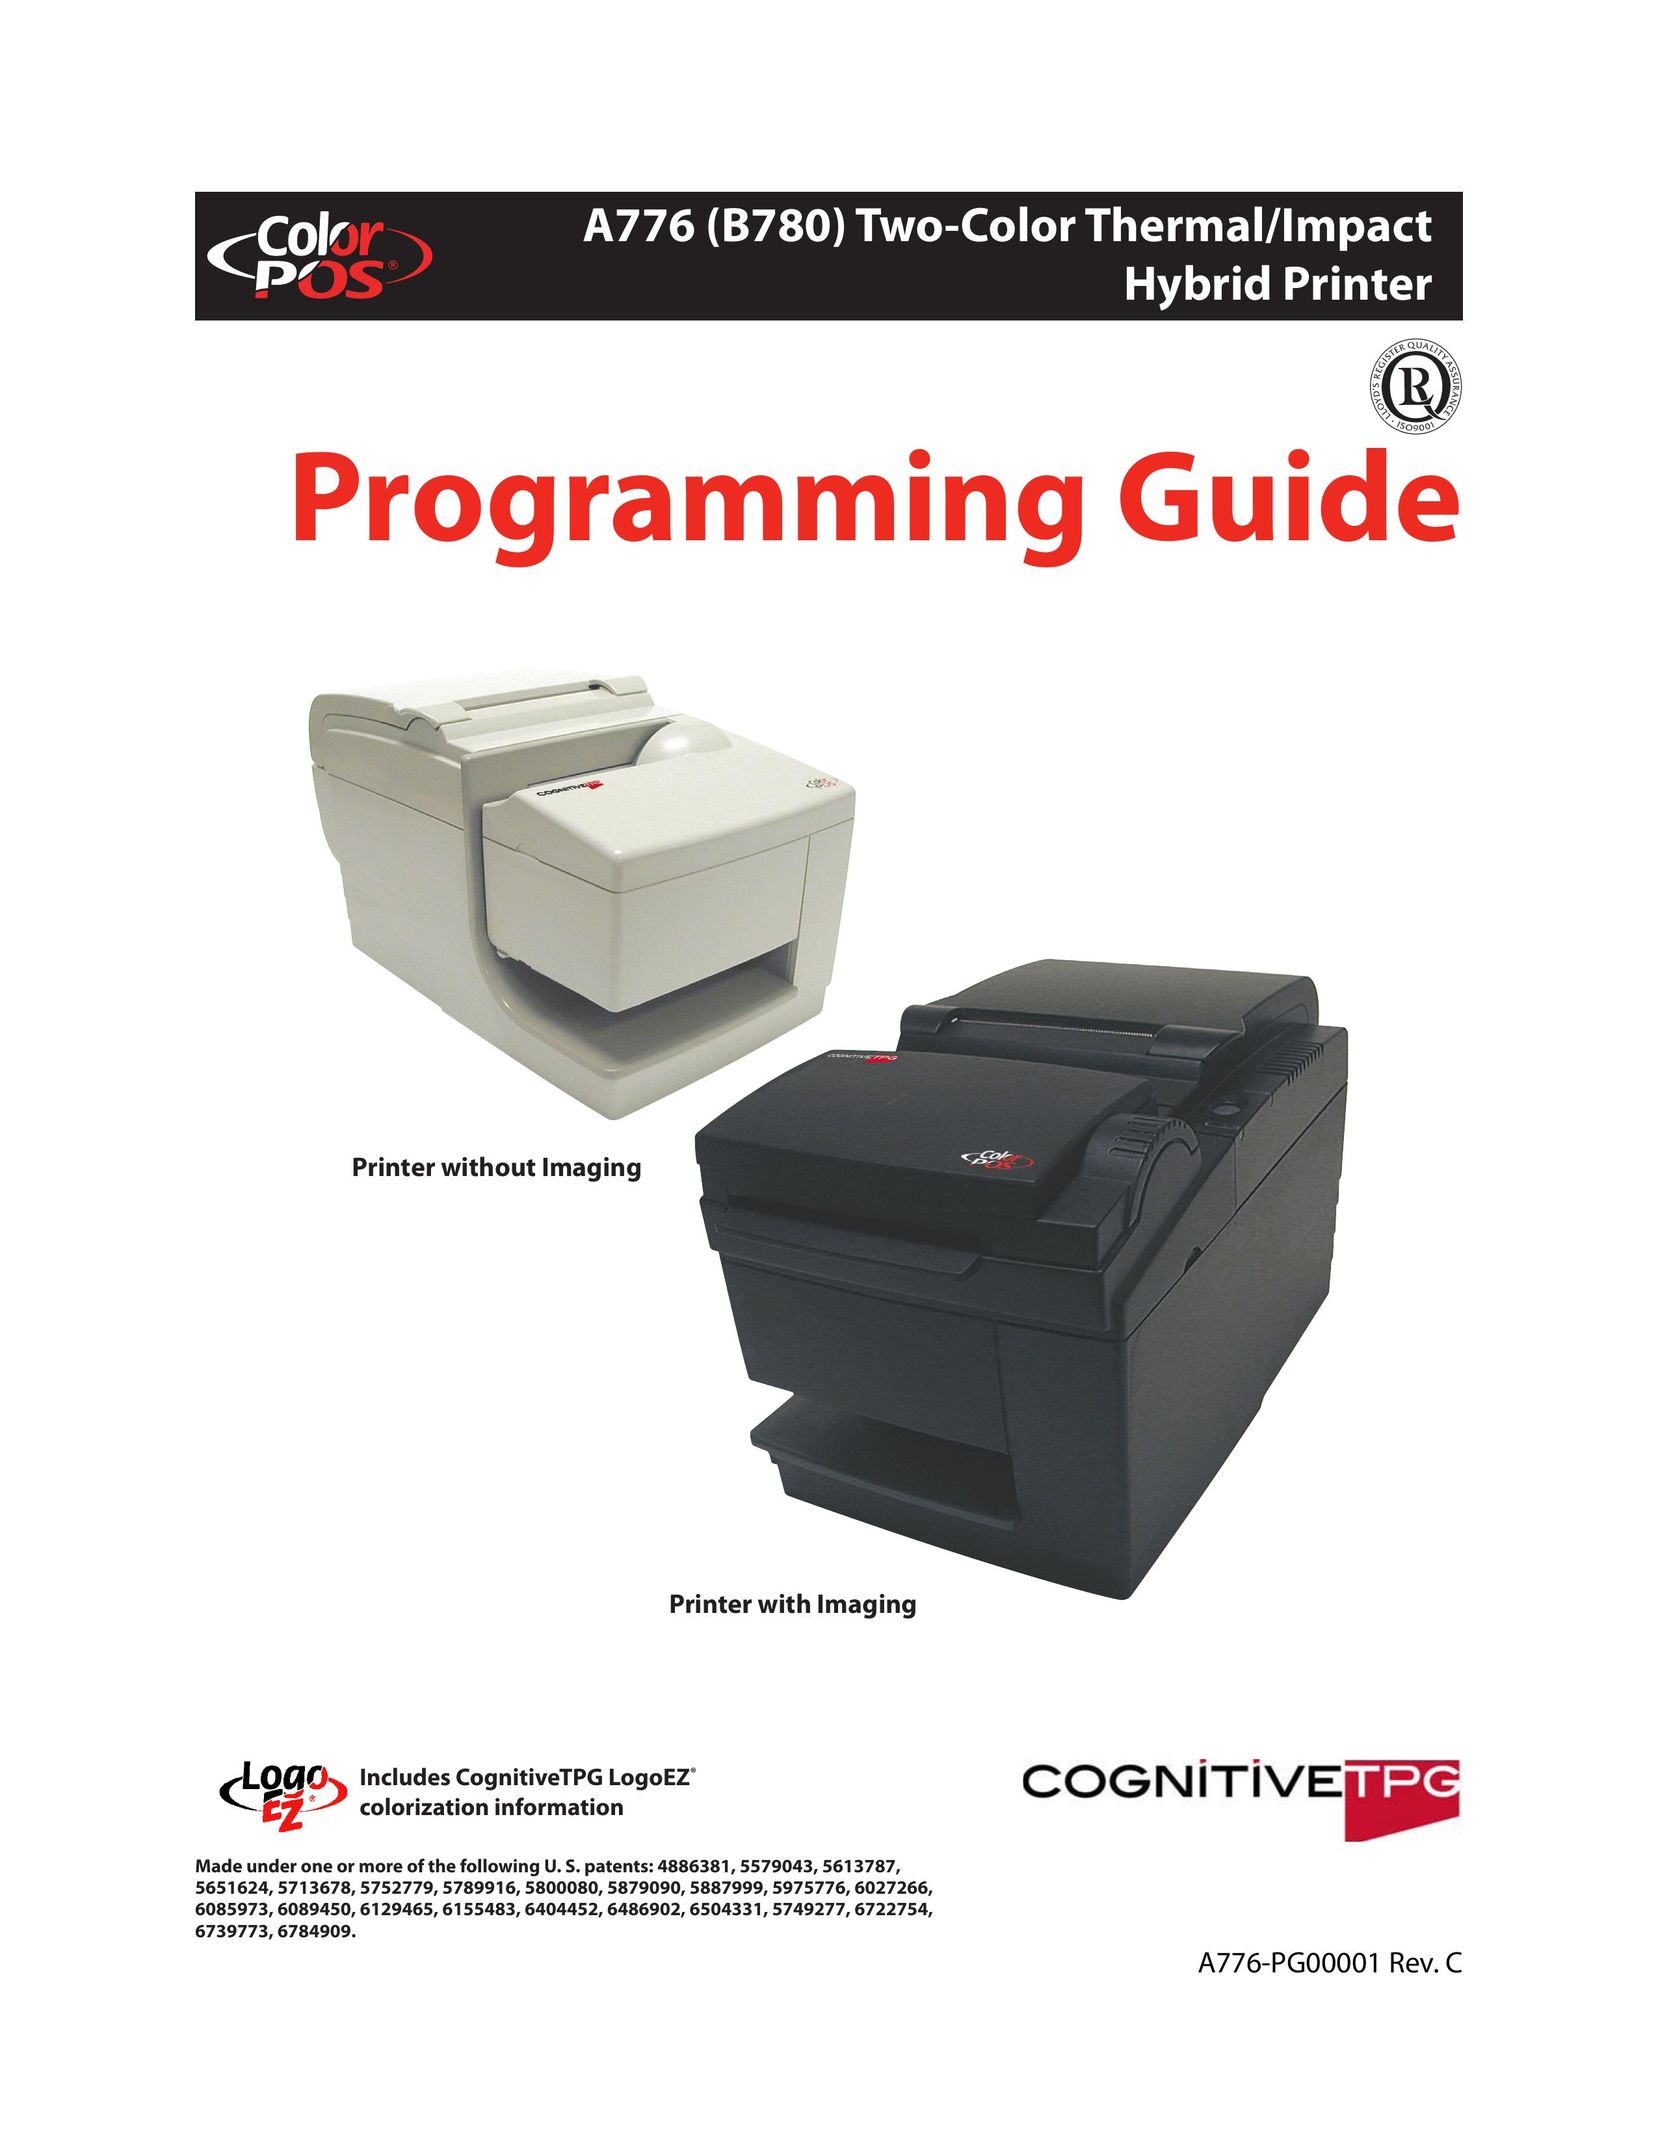 Cognitive Solutions B780 All in One Printer User Manual